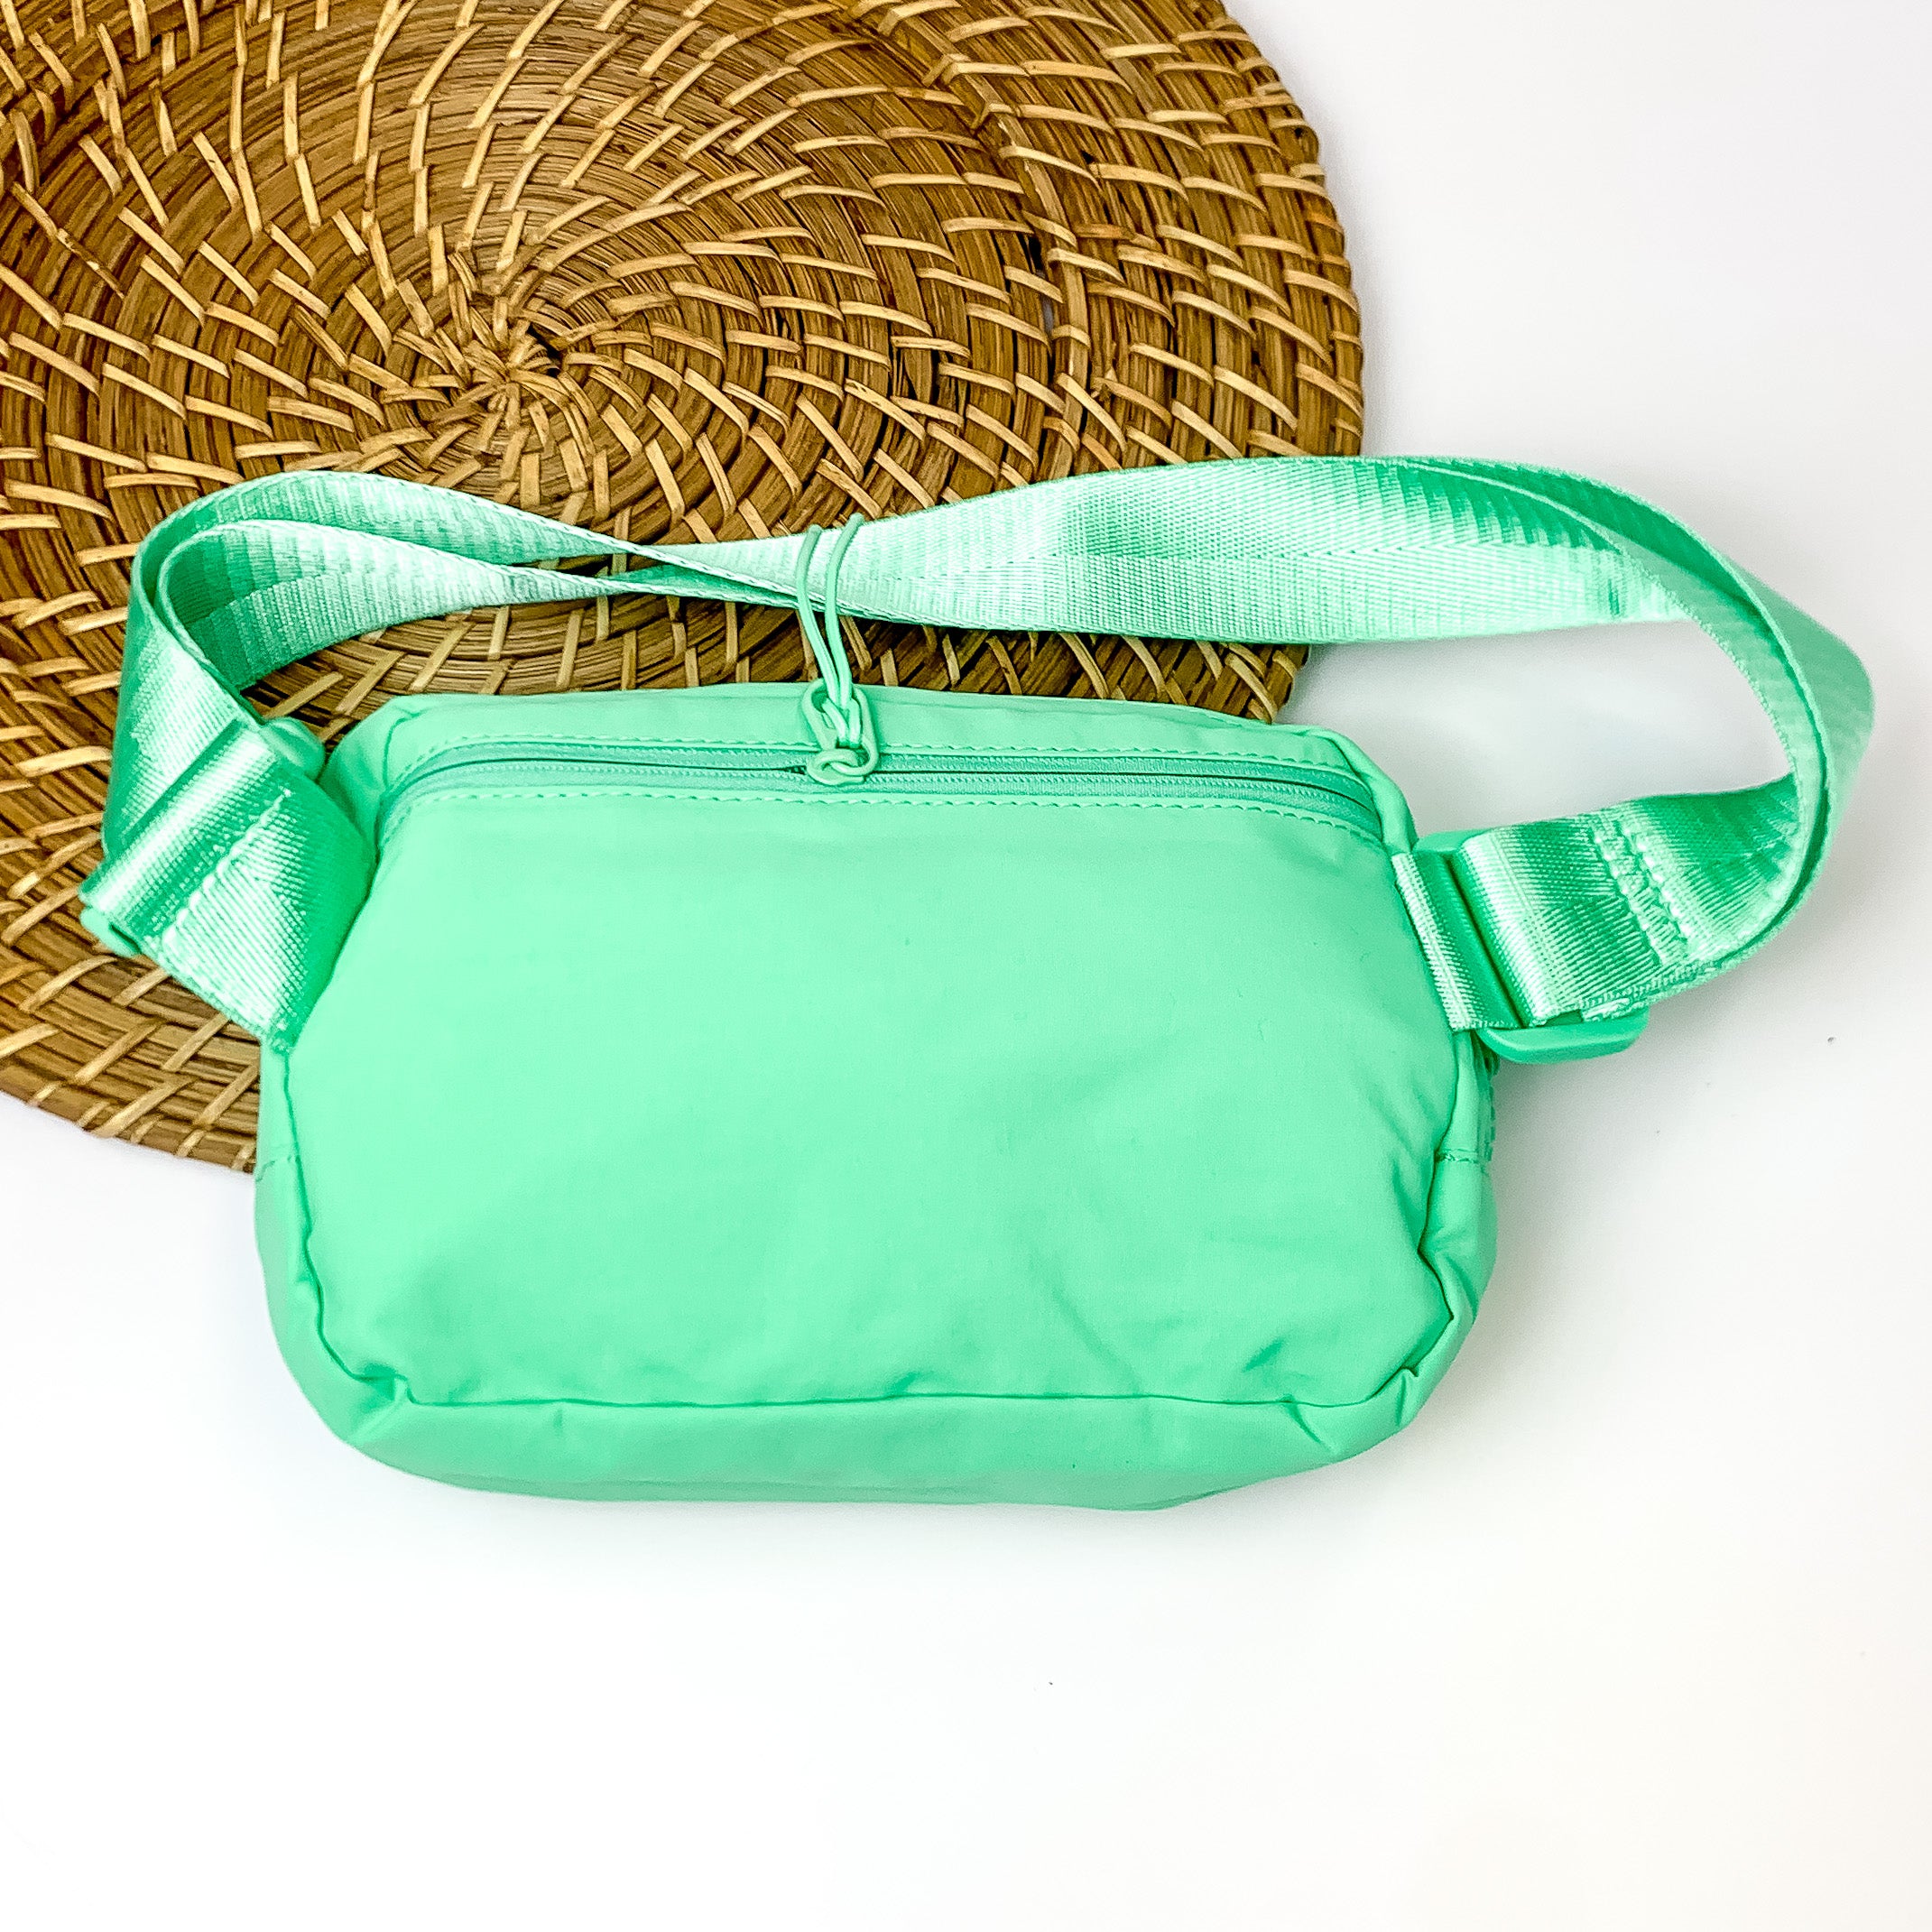 Love the Journey Fanny Pack in Turquoise